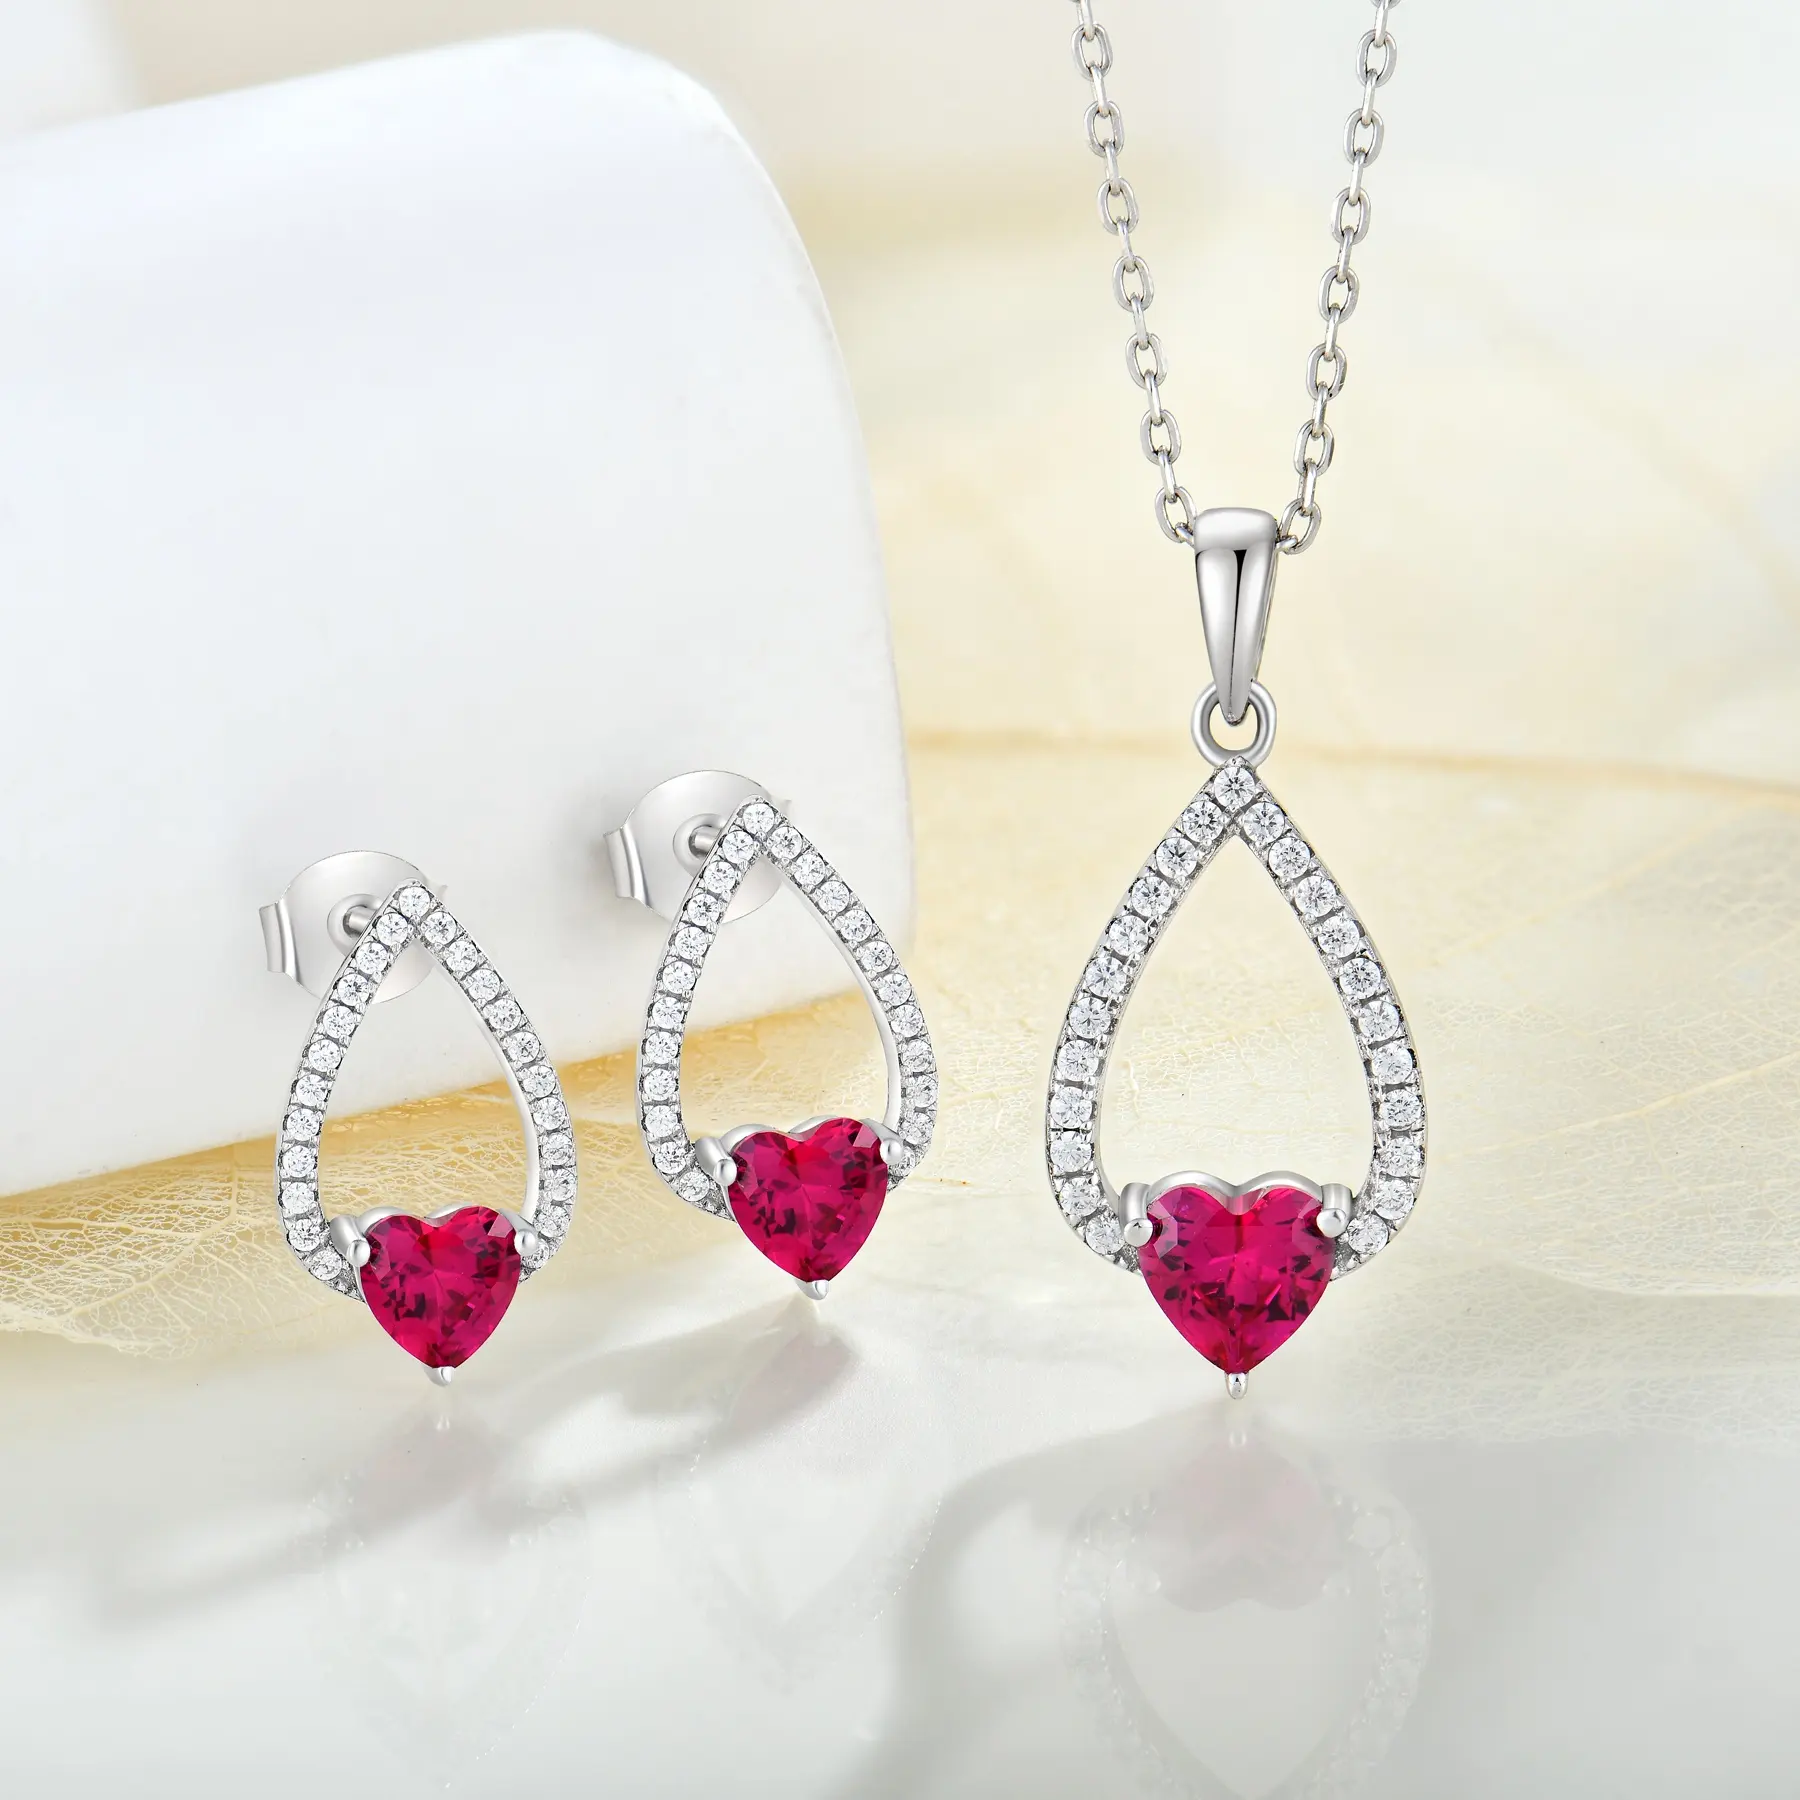 Custom Oem Cubic Zirconia 925 Silver Indian Bridal Ad Wholesale Wedding Heart Earrings Necklace Sets Of Jewelry For Women Ladies